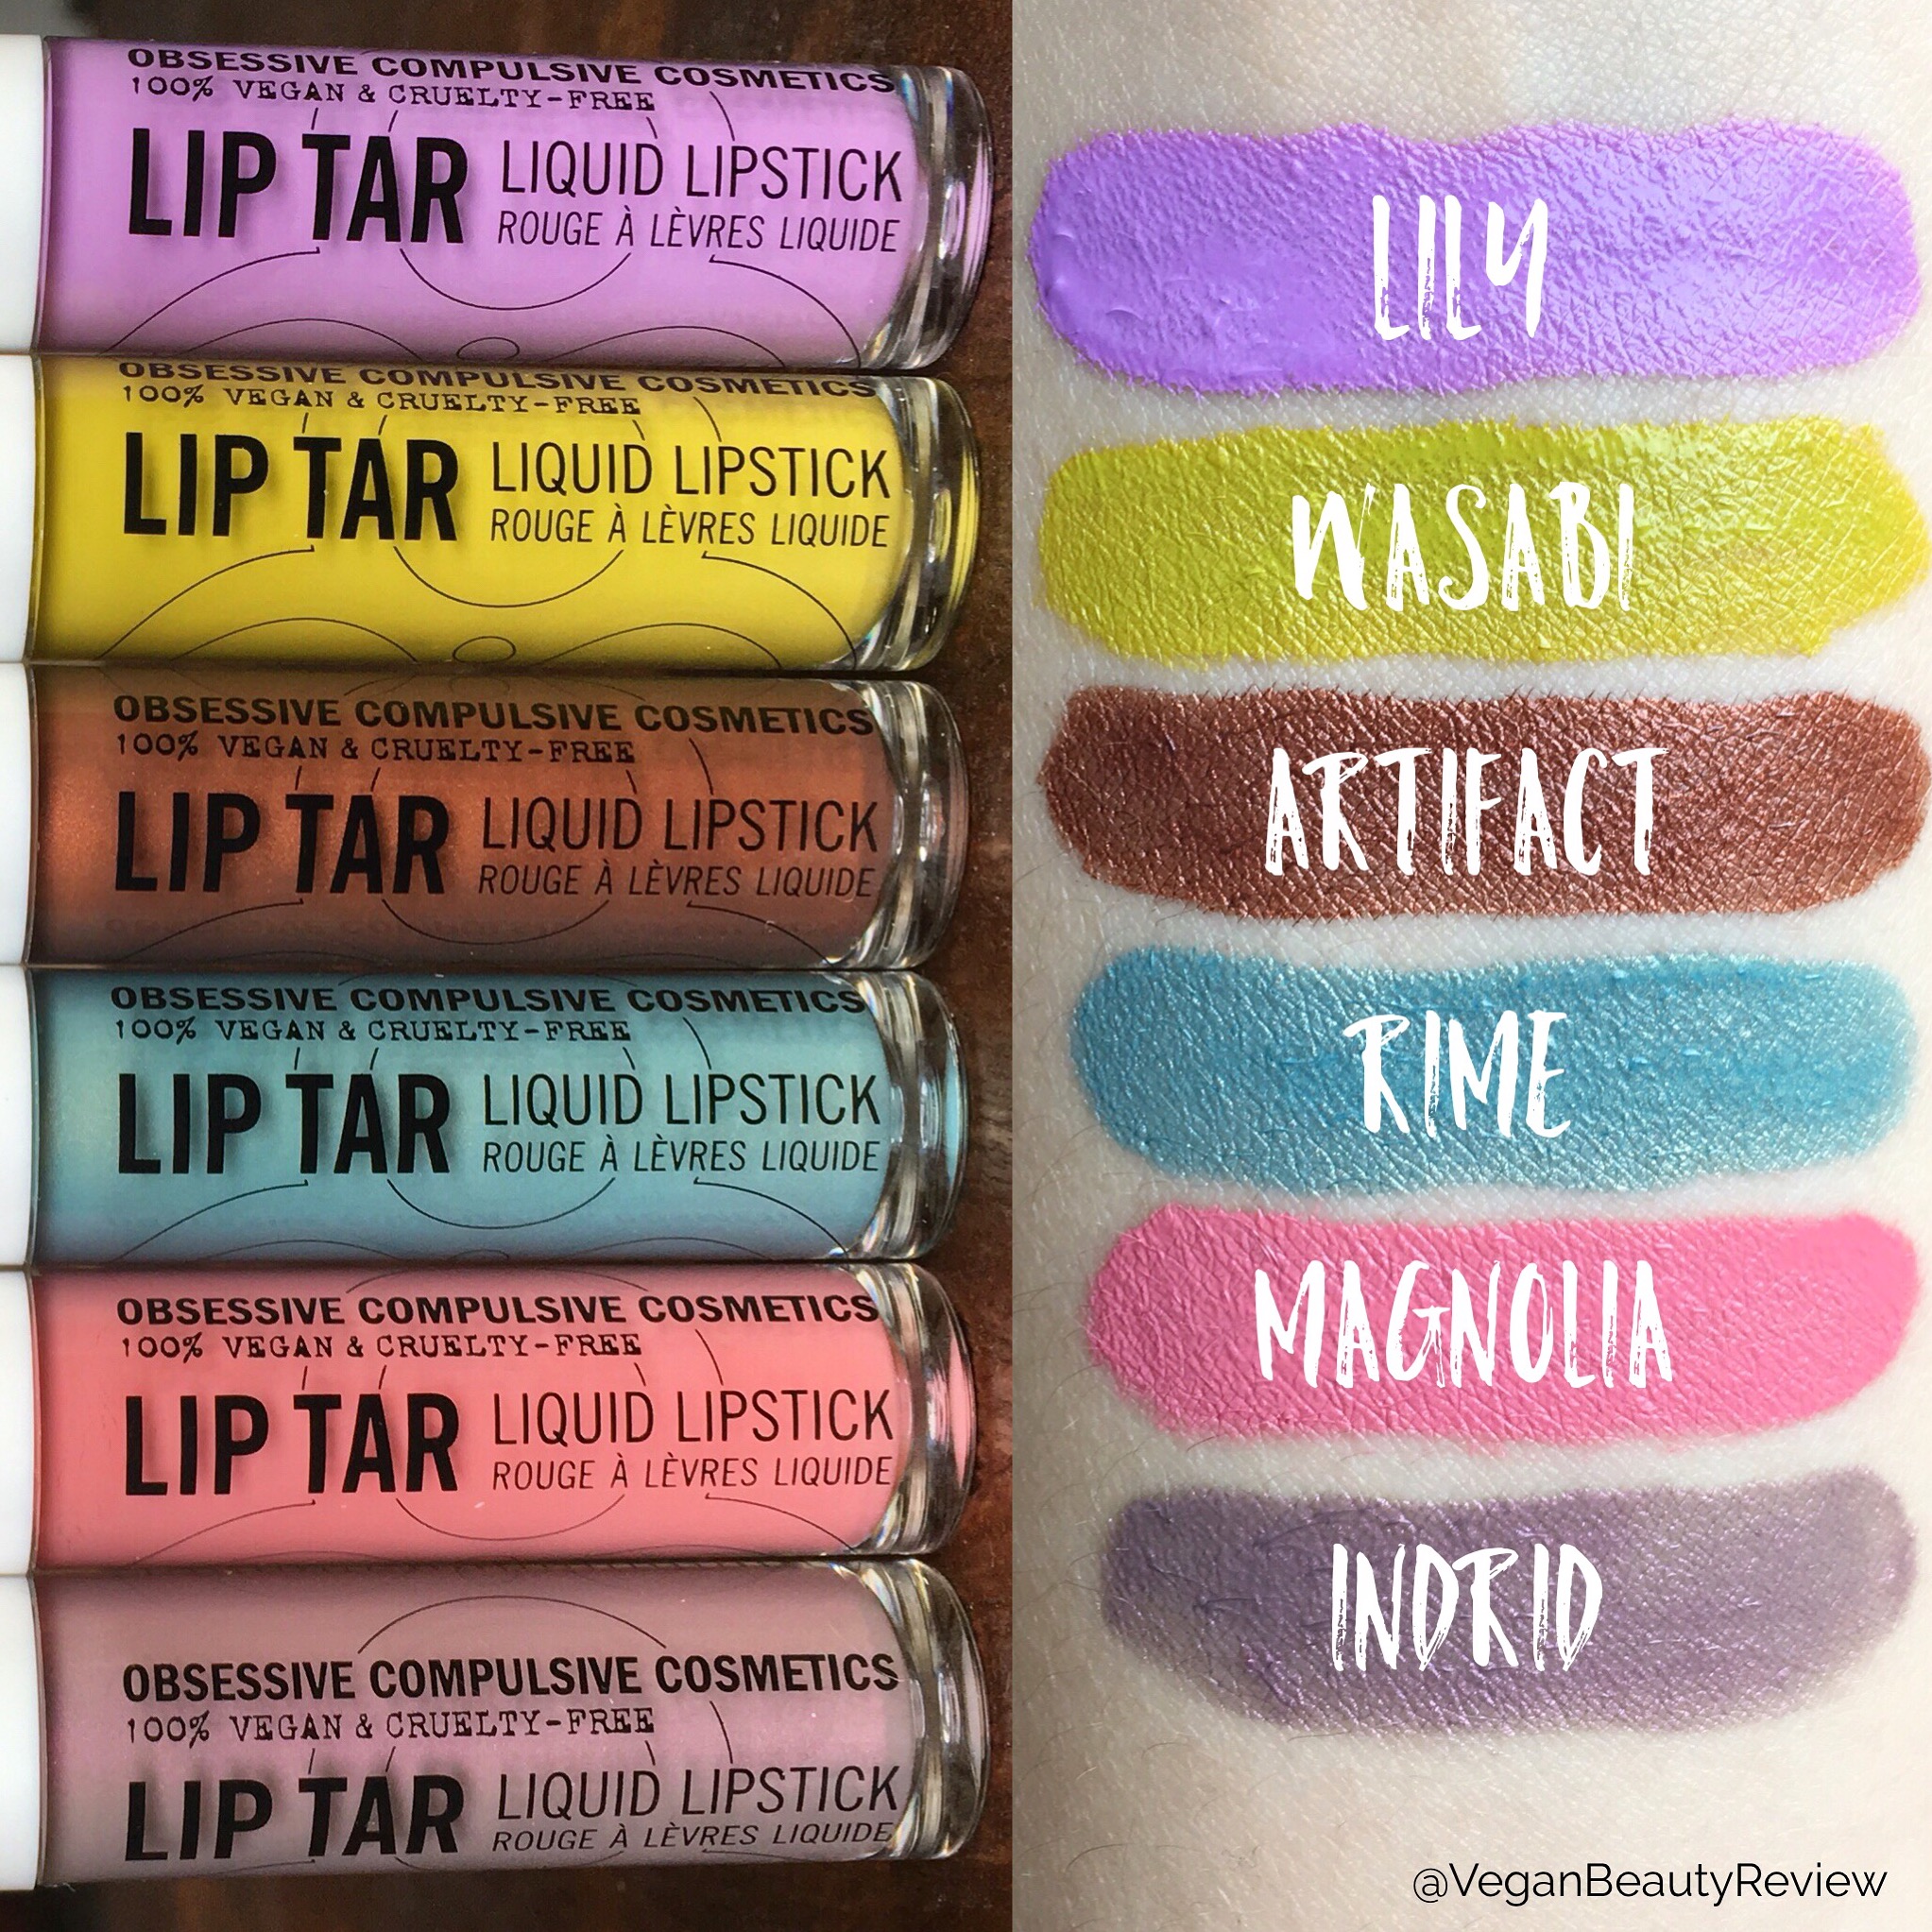 OCC Magnetic Fields Lip Tar Review & Swatches : Vegan Beauty Review | Vegan and Cruelty-Free Beauty, Fashion, Food, Lifestyle